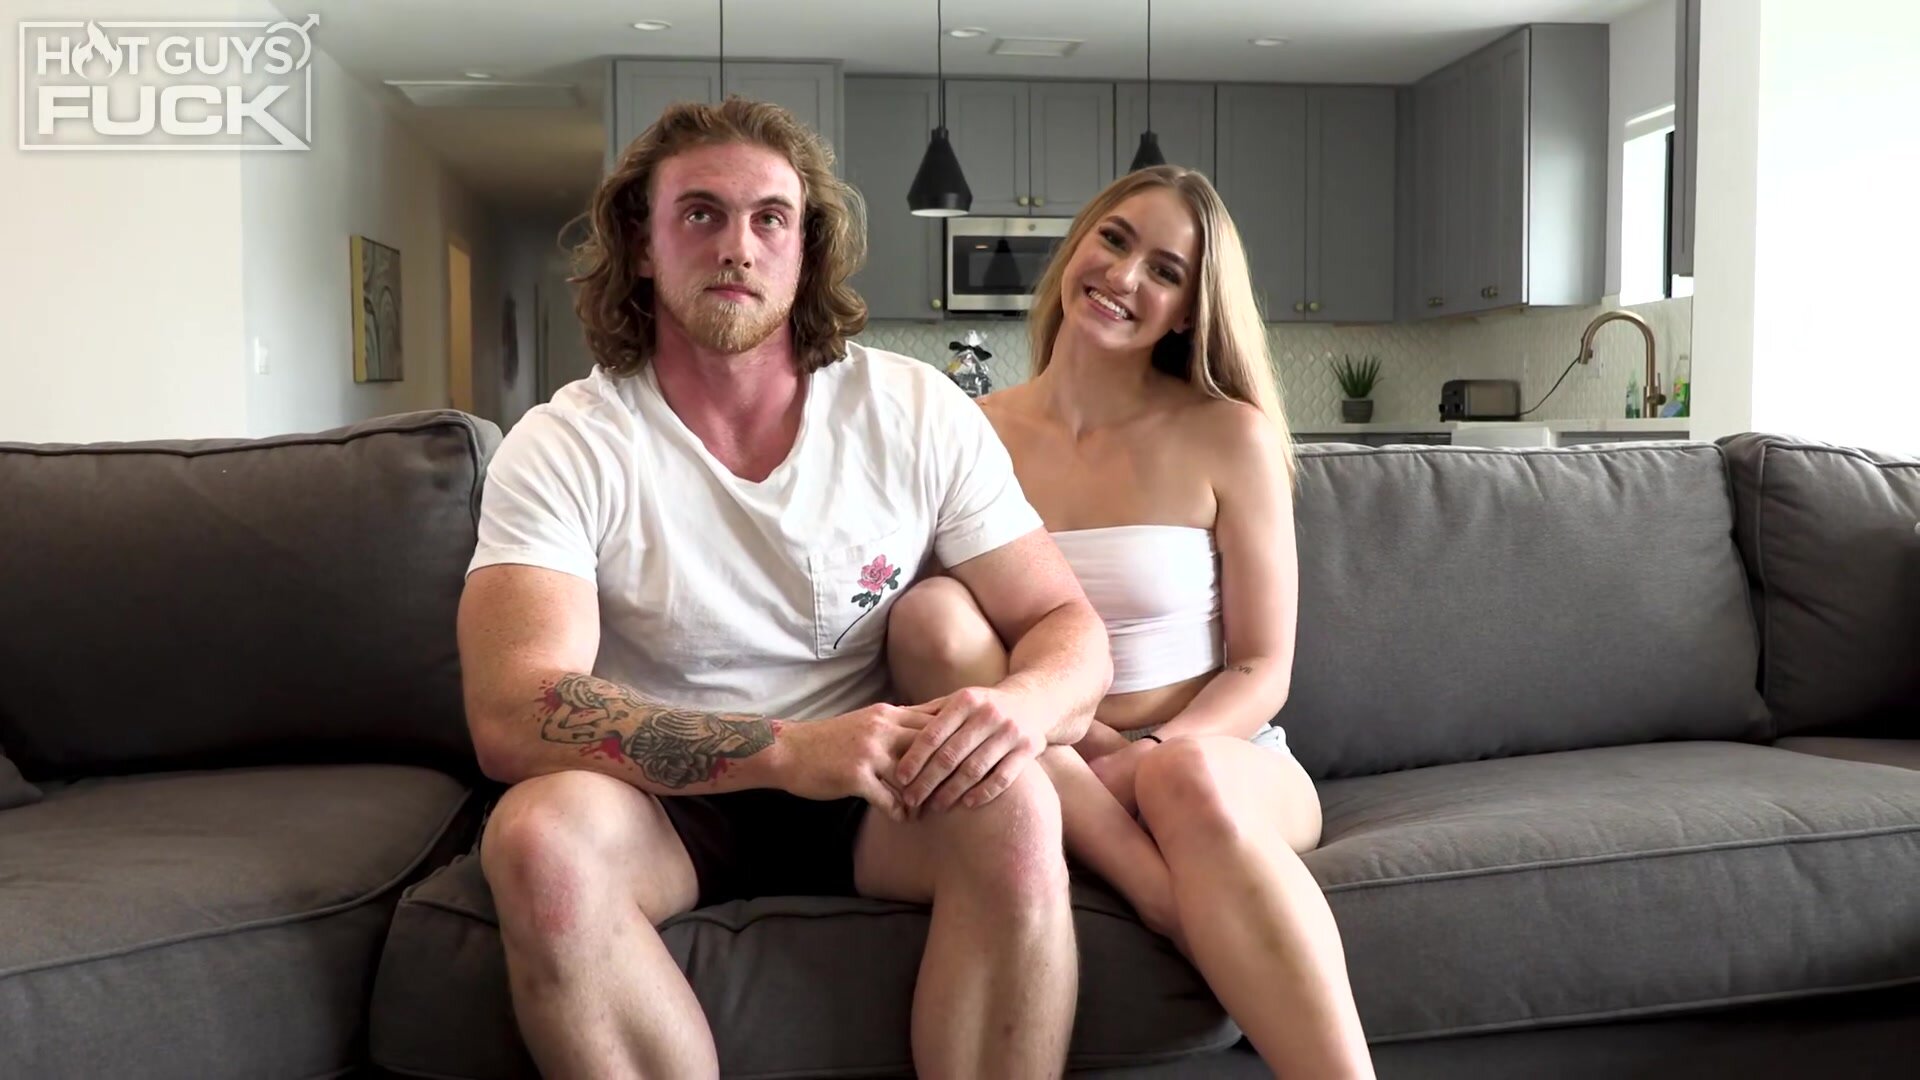 HotGuysFuck - Dustin Reynolds And Kenzie Page 2